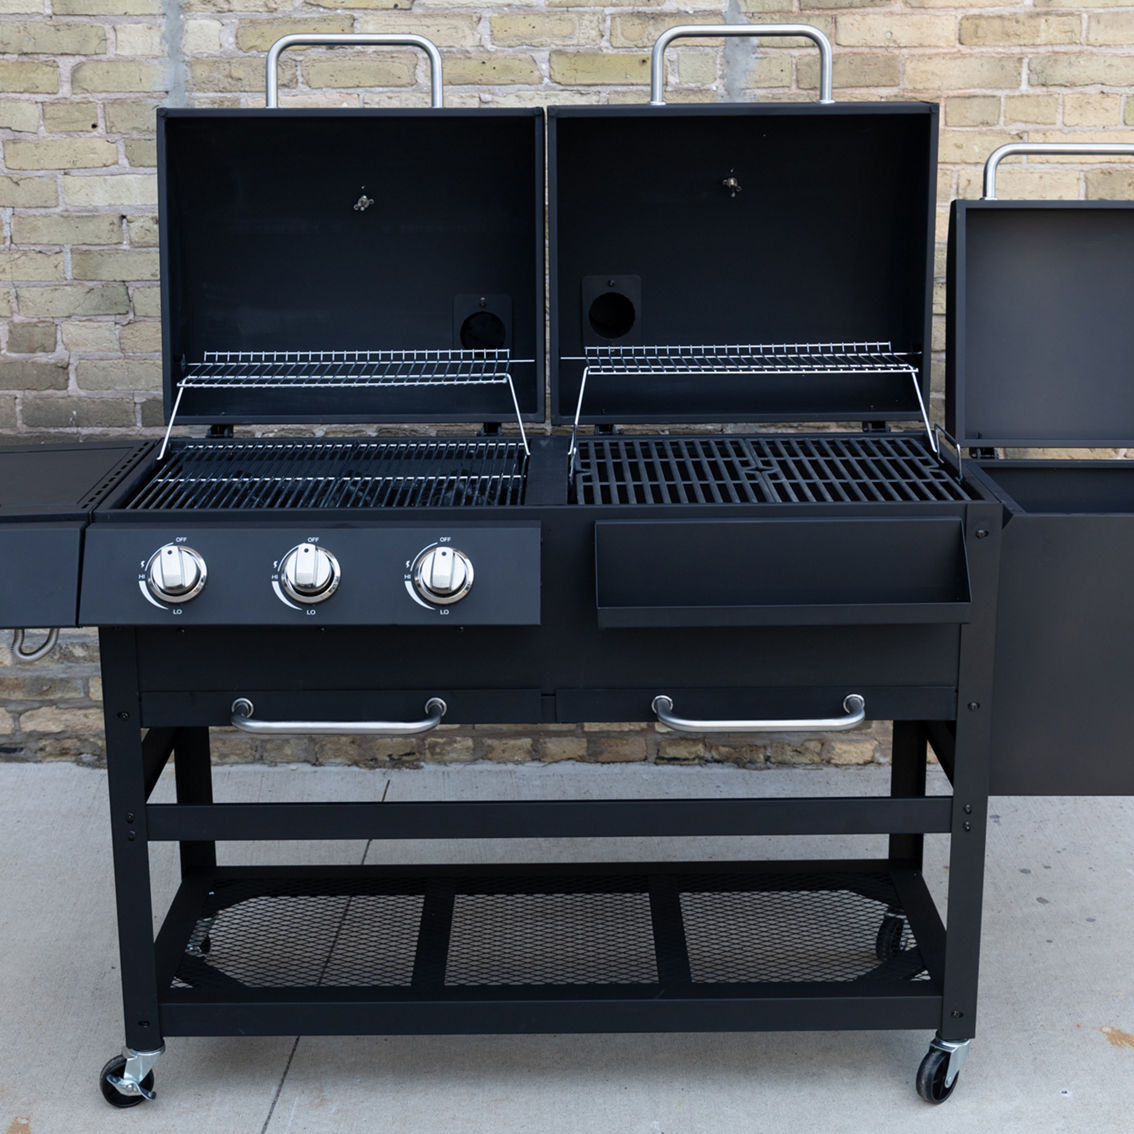 Chard Gas and Charcoal Hybrid Grill with Side Burner and Side Smoker - Image 2 of 10